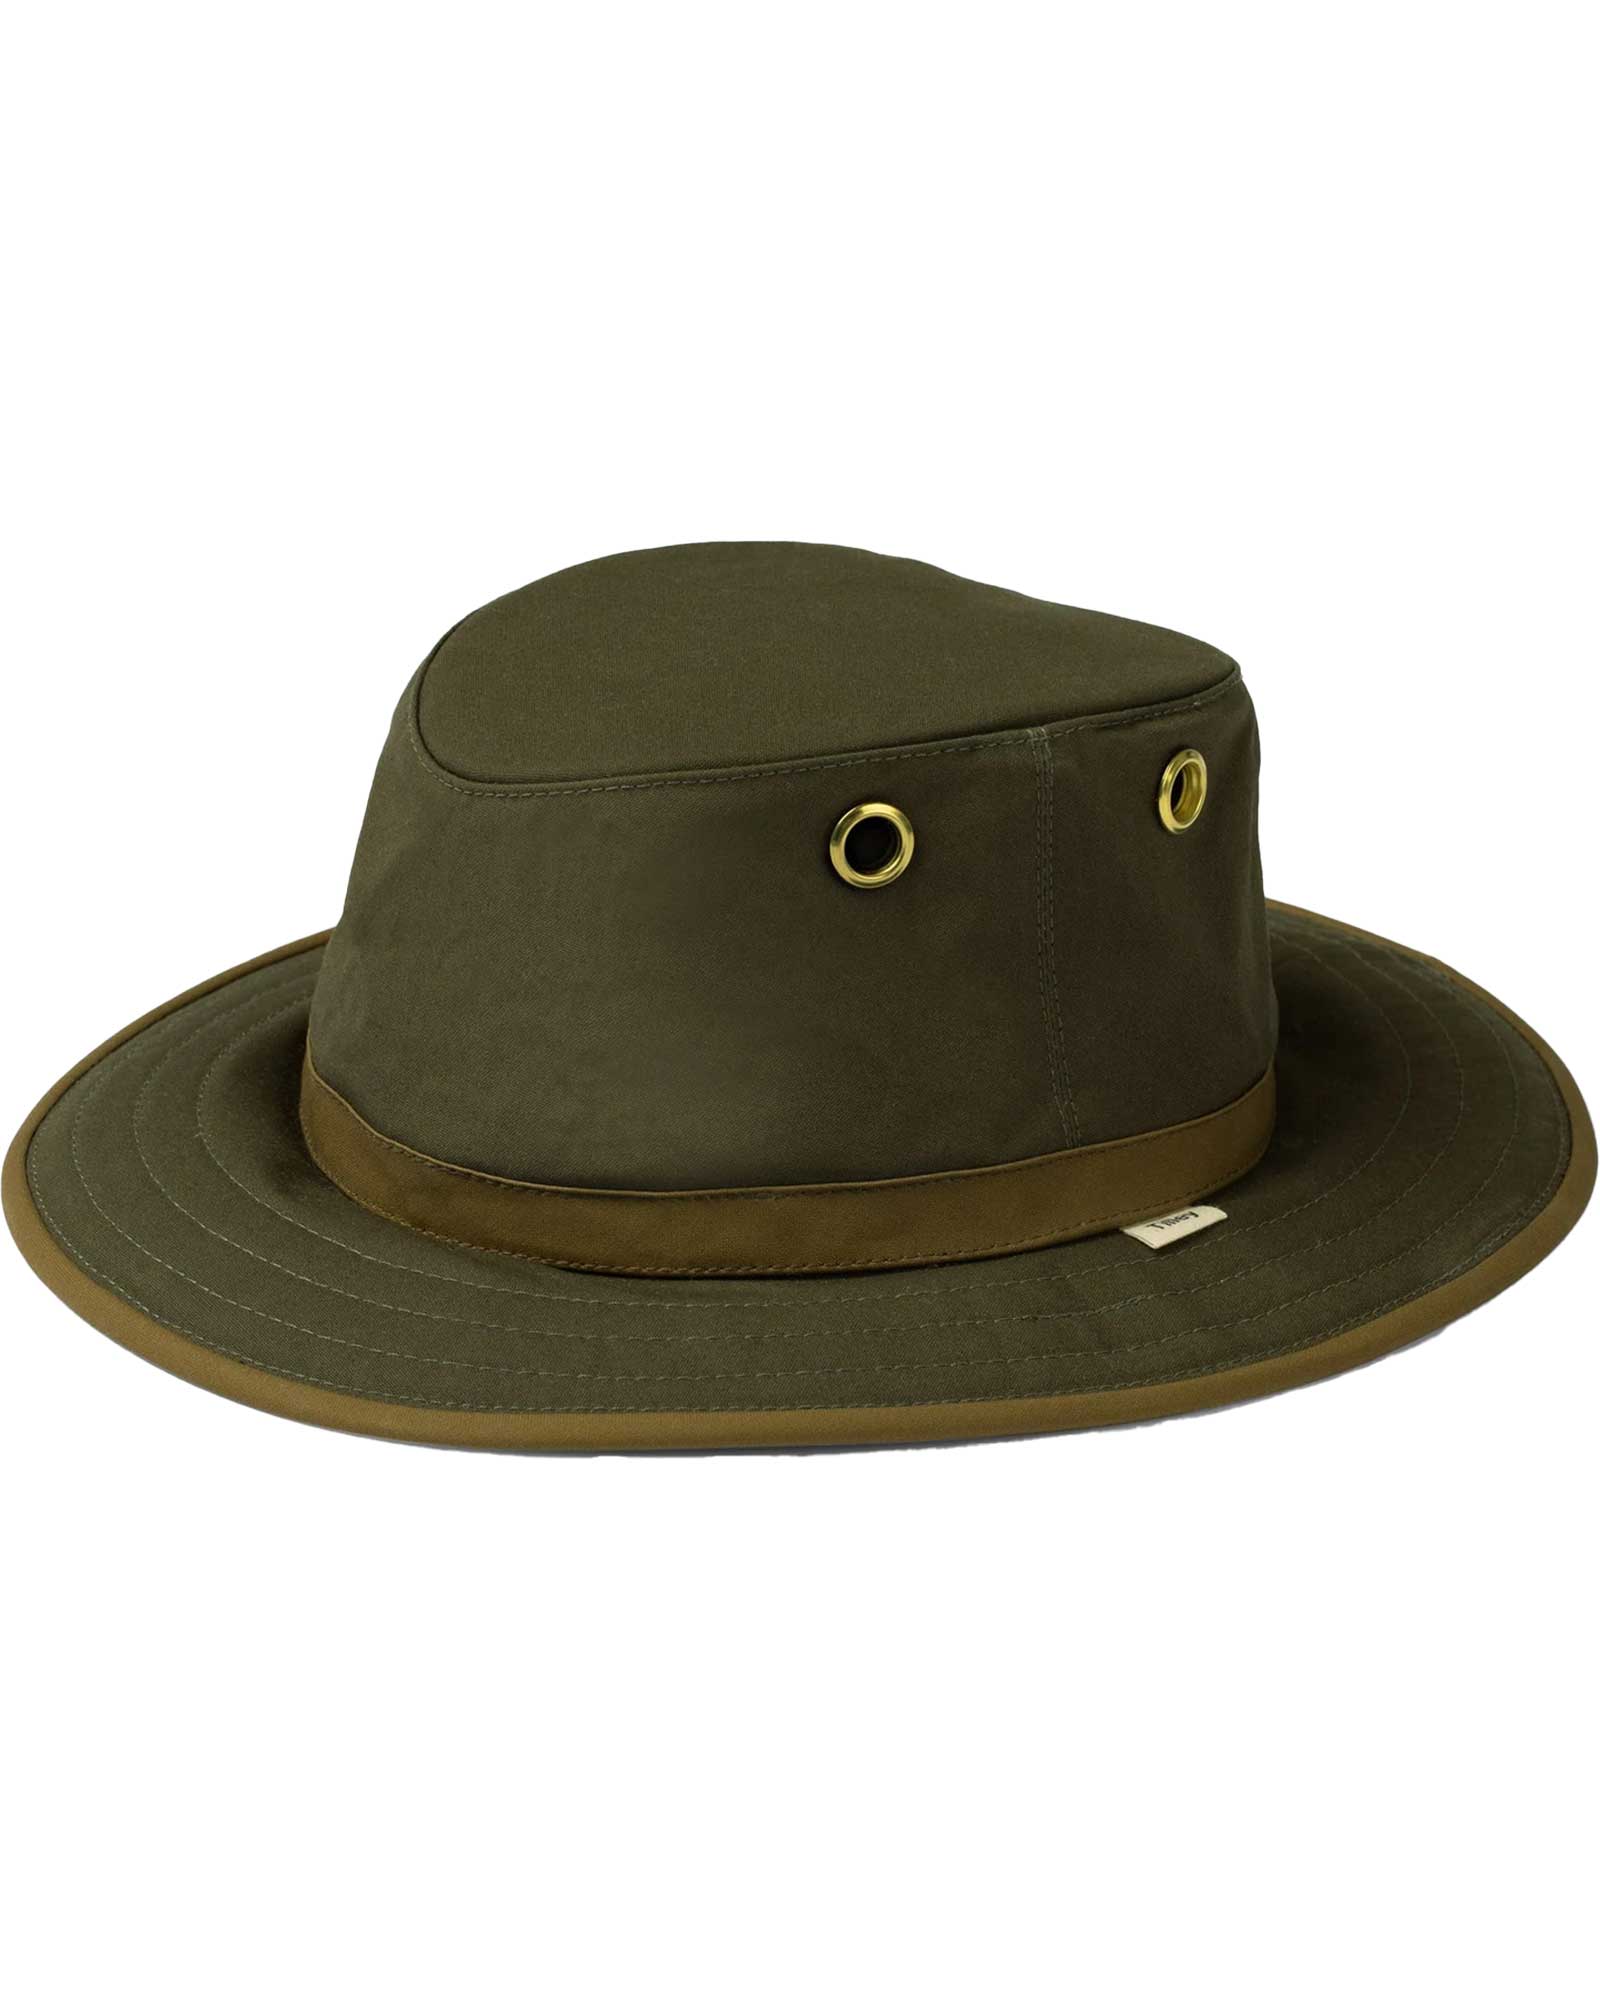 Tilley Outback Waxed Cotton Hat - Green 7 3/4